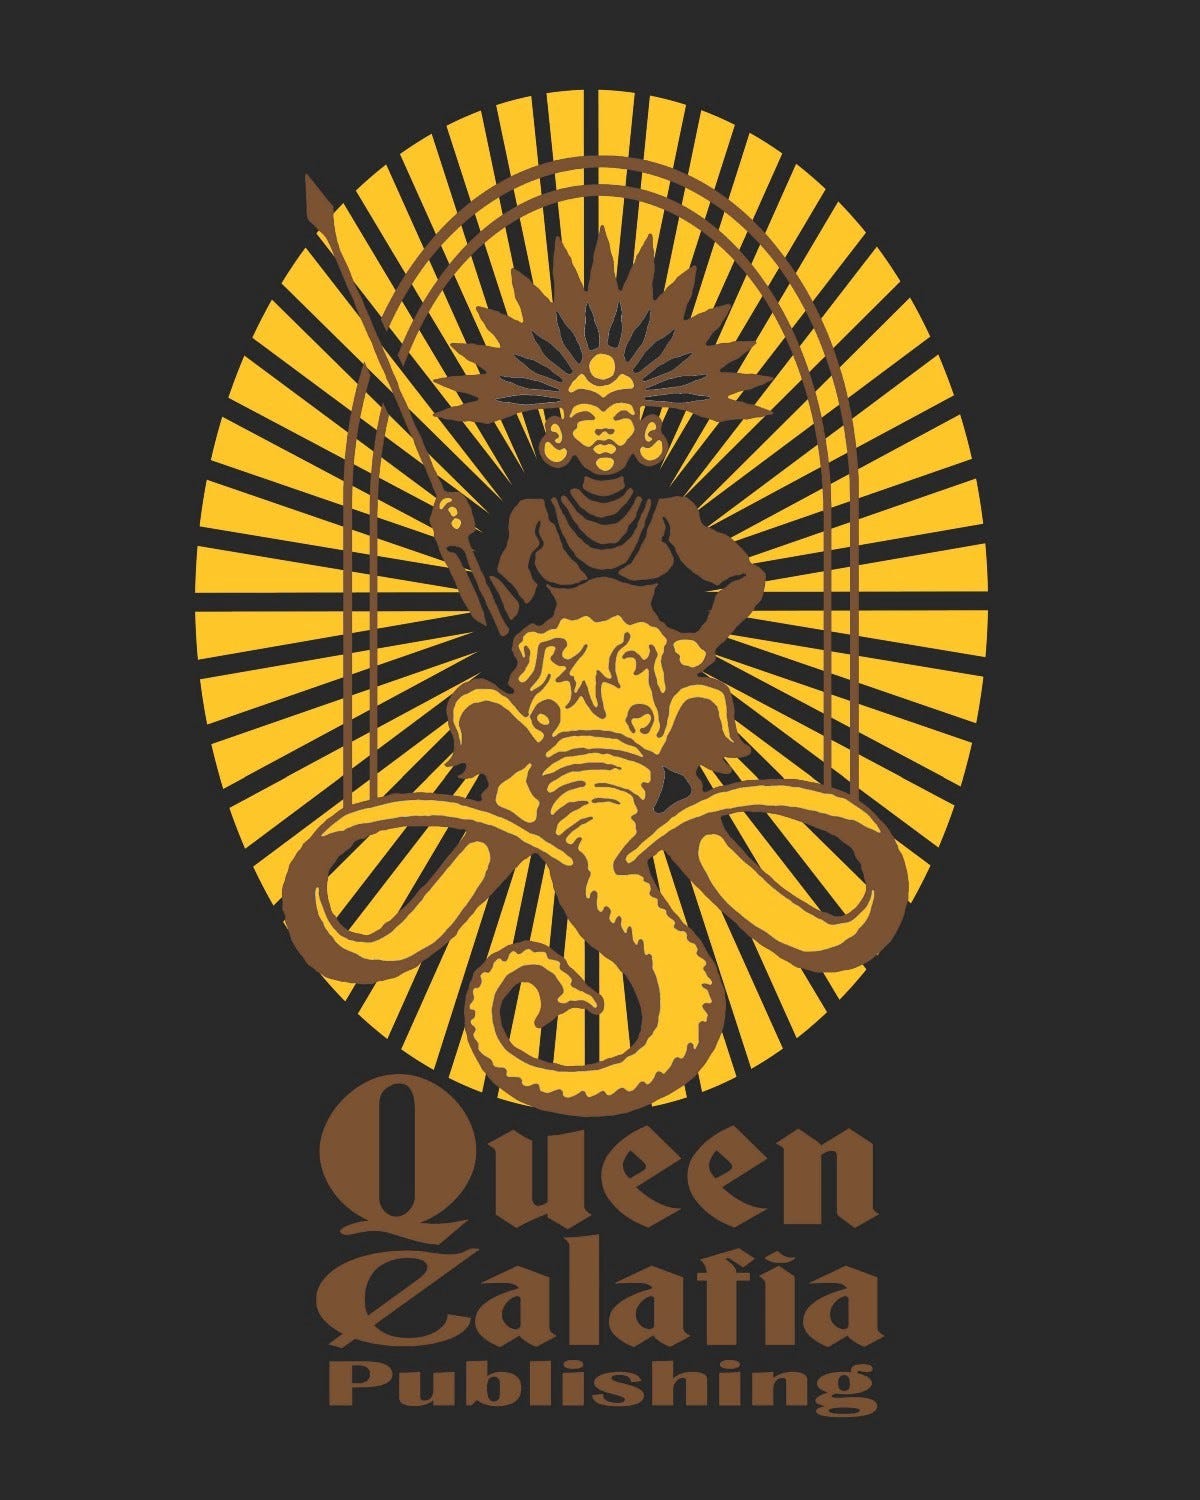 The Queen Califia Publishing logo. Drawing of a Black Amazon holding a spear and riding on the back of an elephant, encased in a yellow oval.